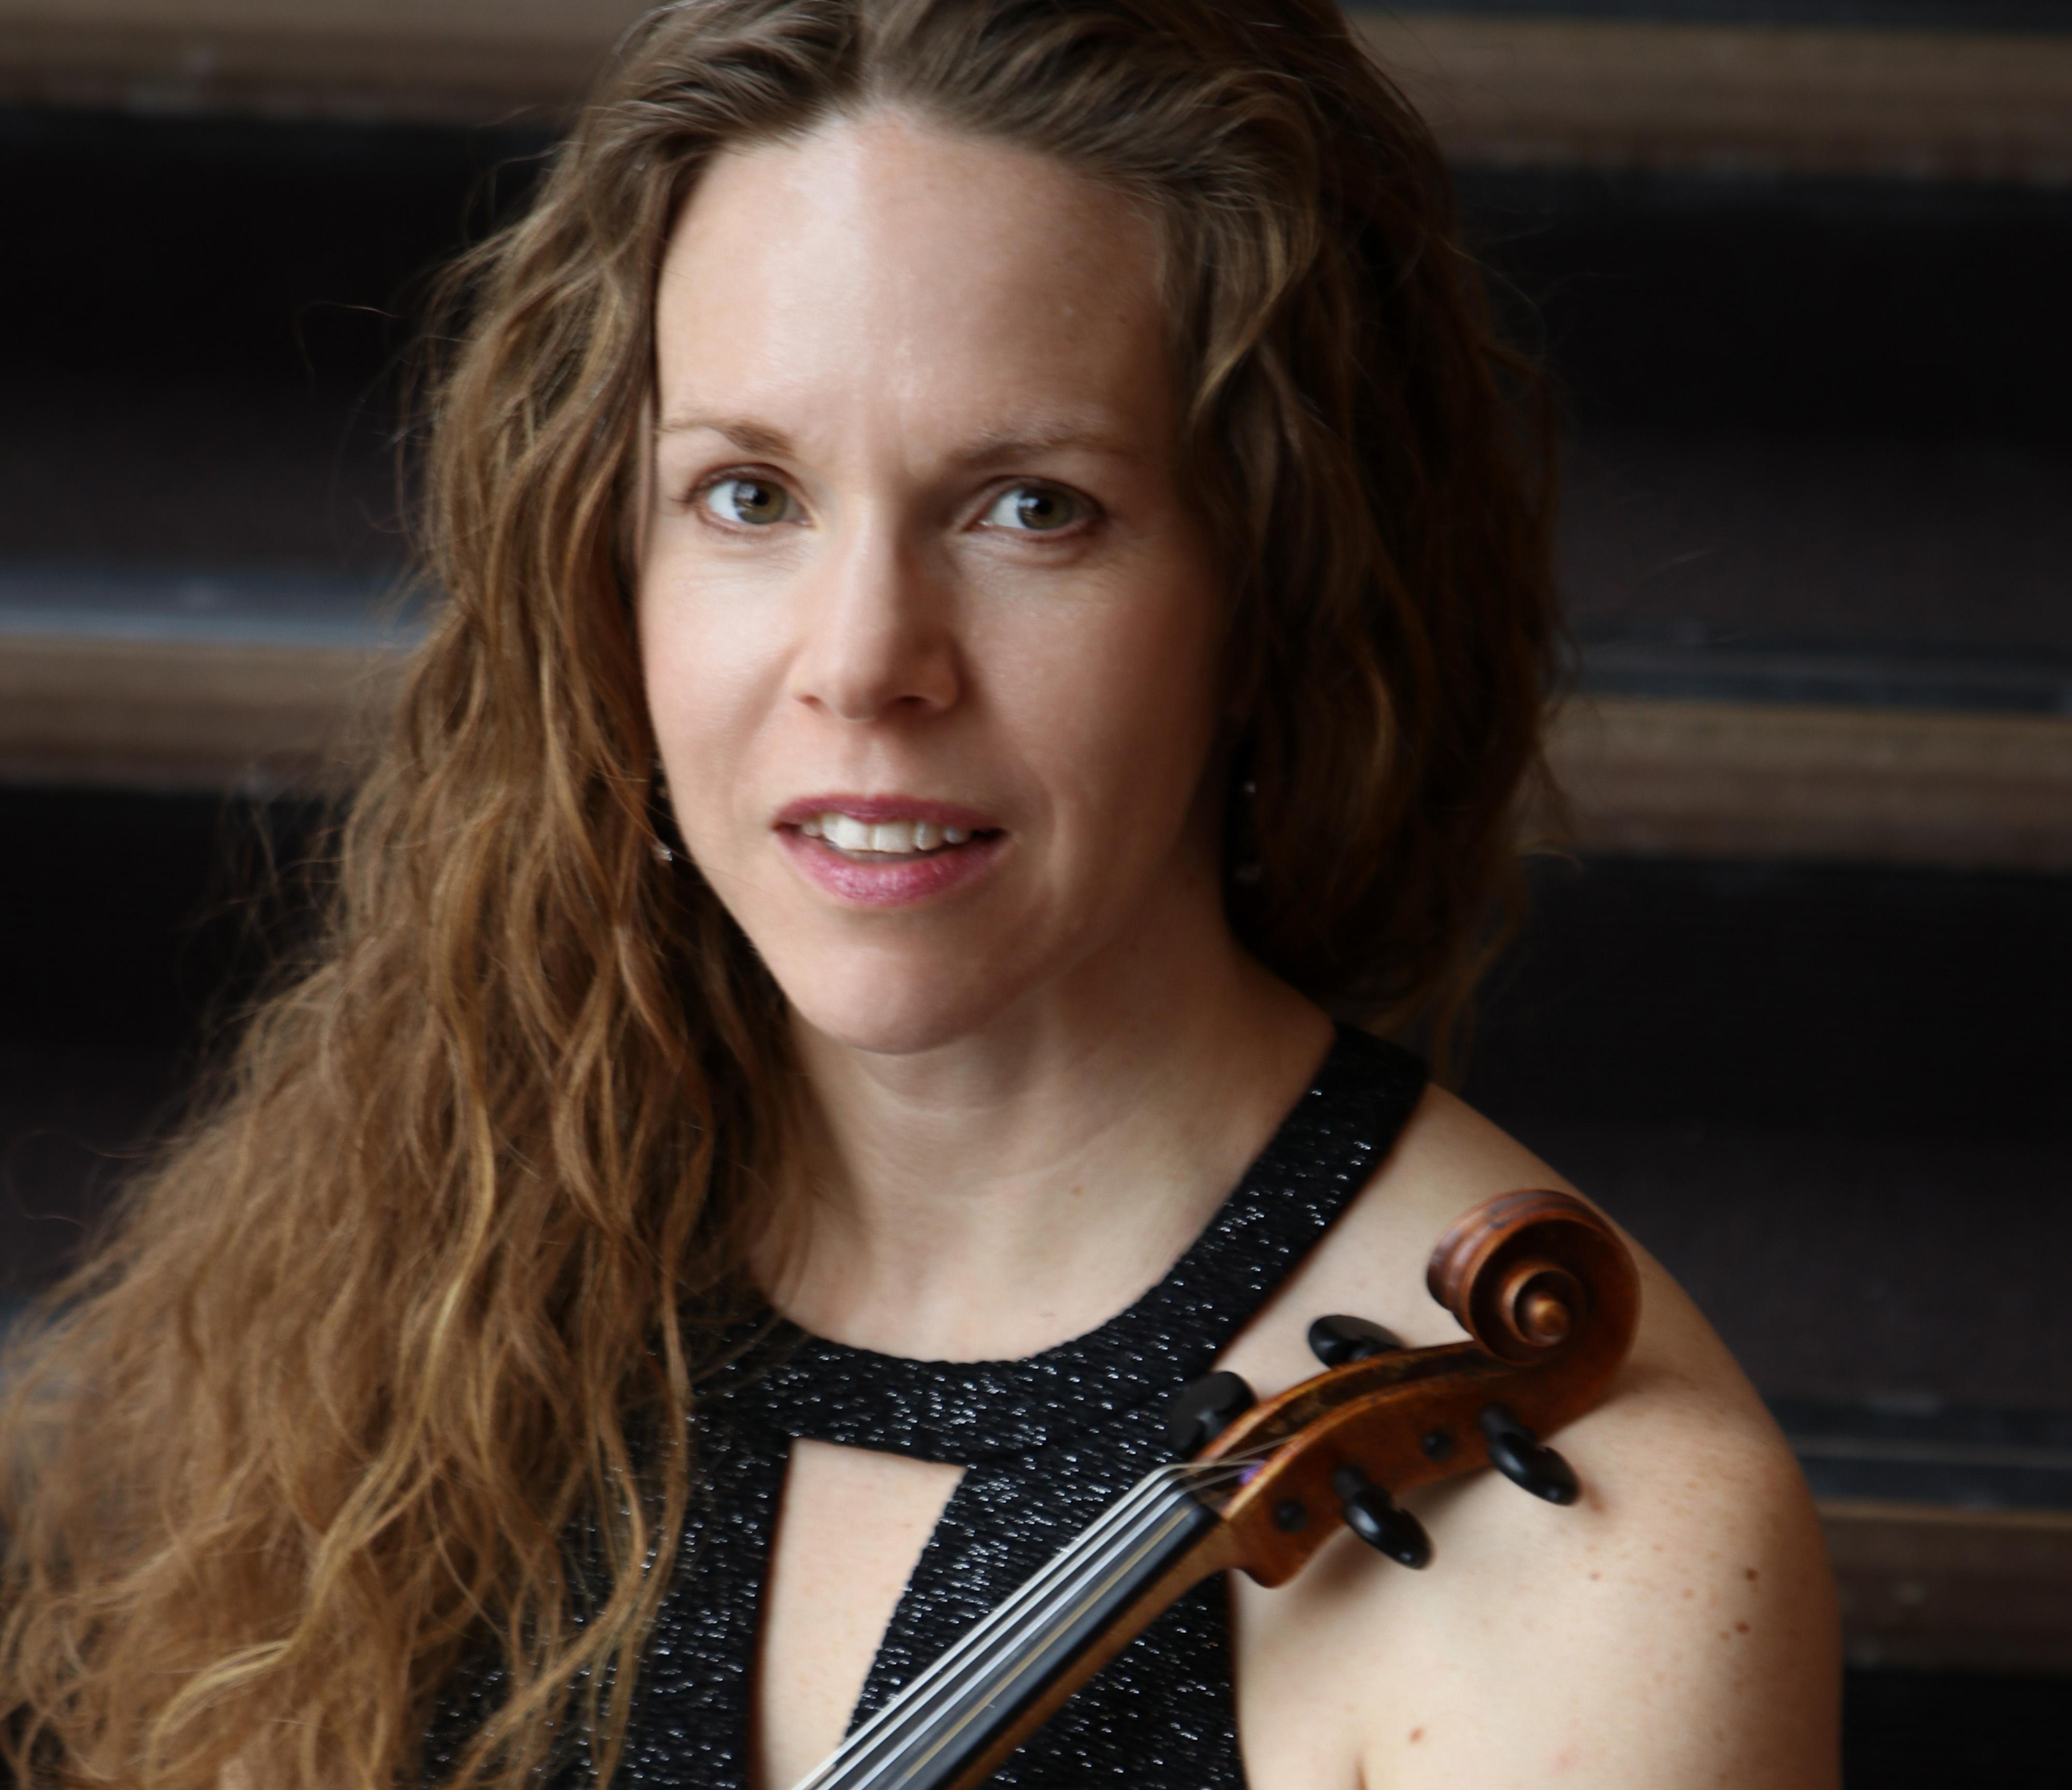 Sonya Williams, assistant concertmaster of Symphoria, is part of the Salt City String Quartet performing in the Ke-nekt' Chamber Music Series